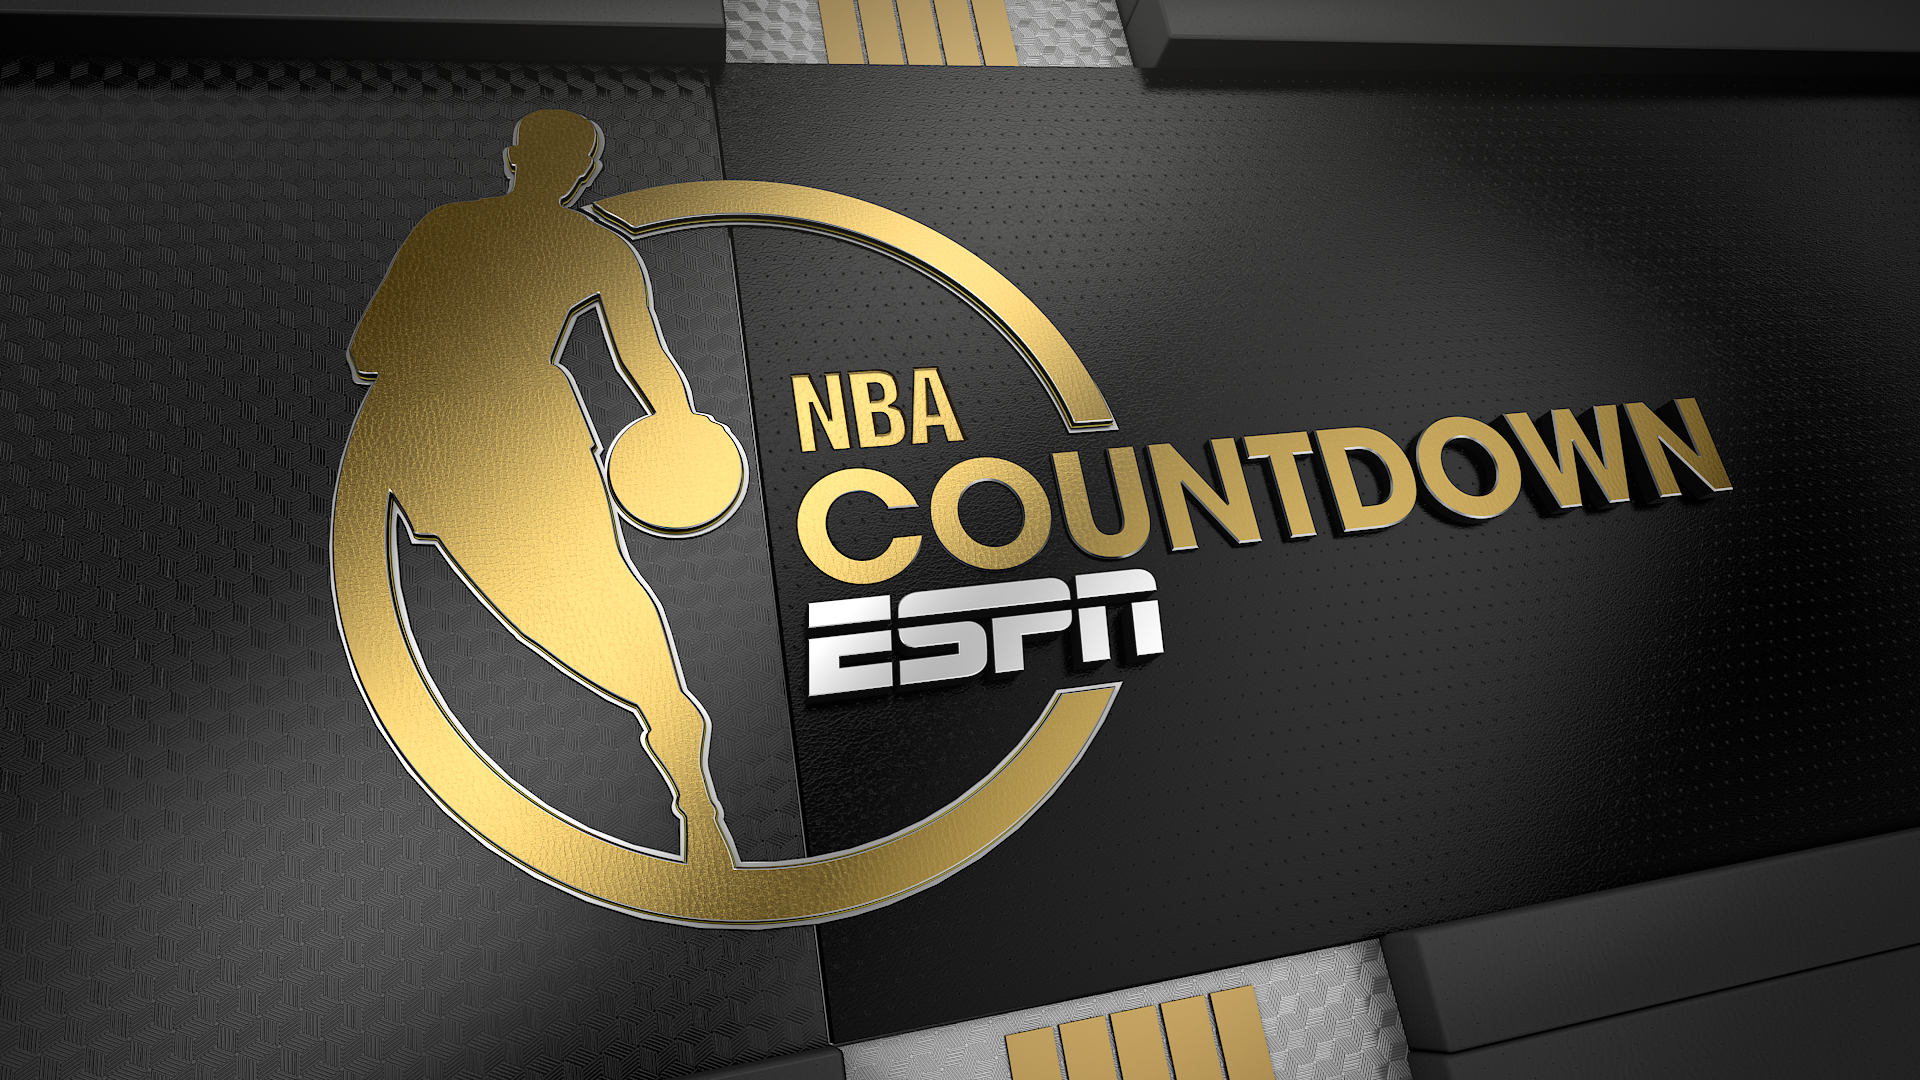 ESPN to Unveil New Creative Brand Identity for NBA Broadcasts